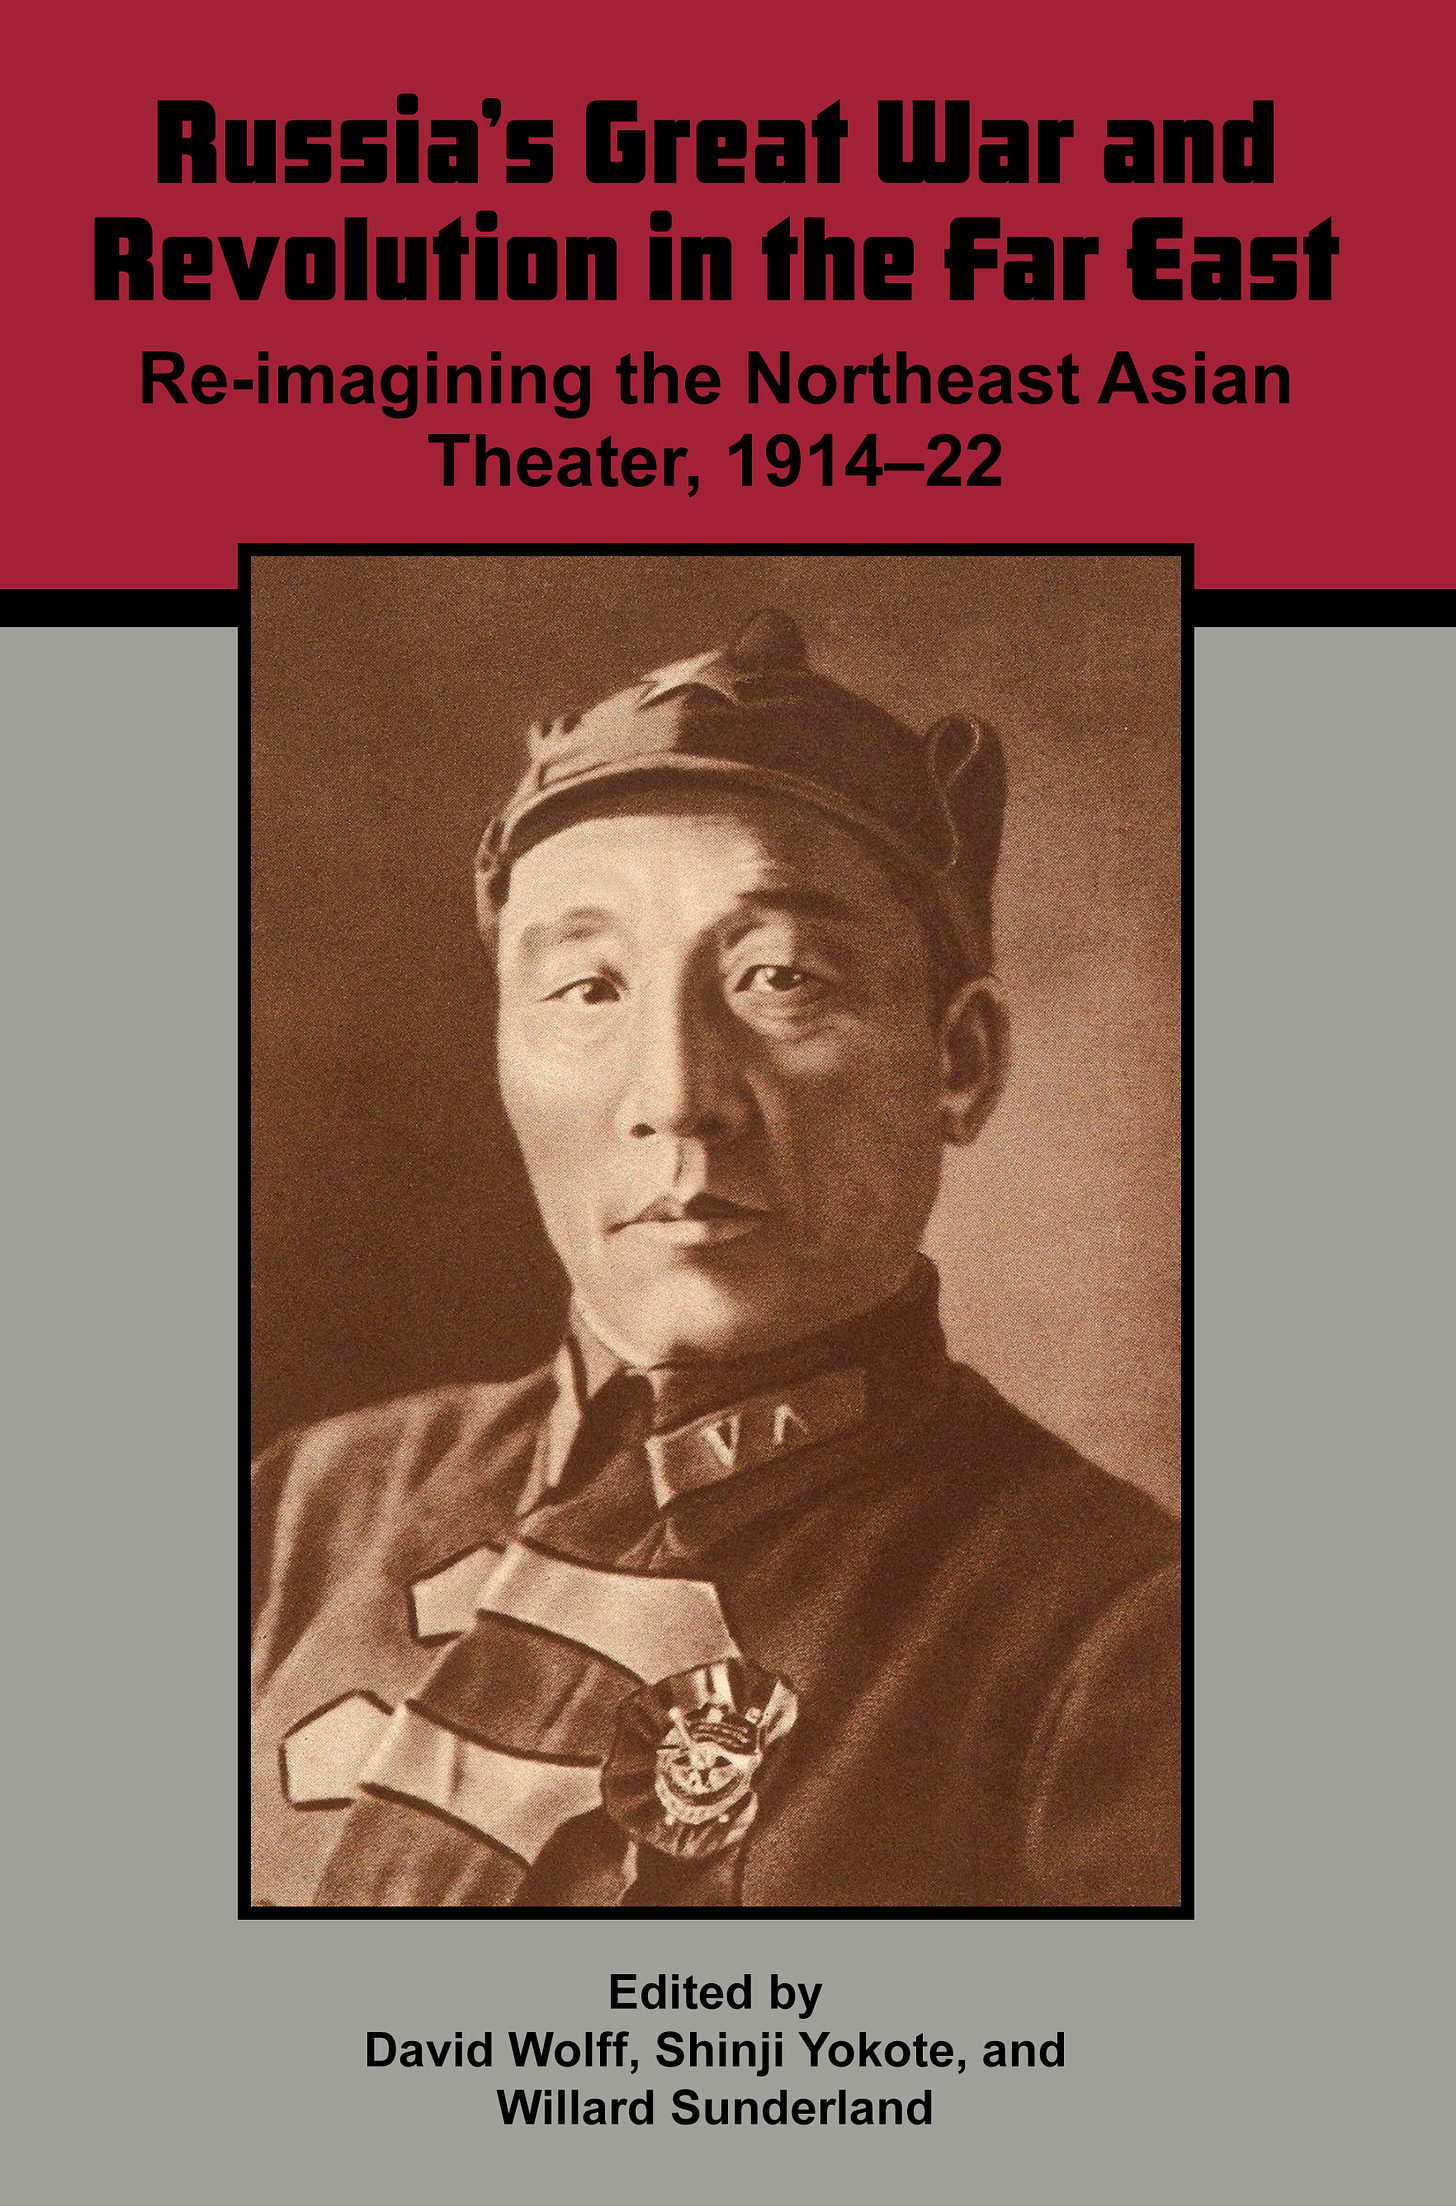 Russia's Great War and Revolution in the Far East: Re-Imagining the Northeast  Asian Theater, 1914-22 by David Wolff | Goodreads